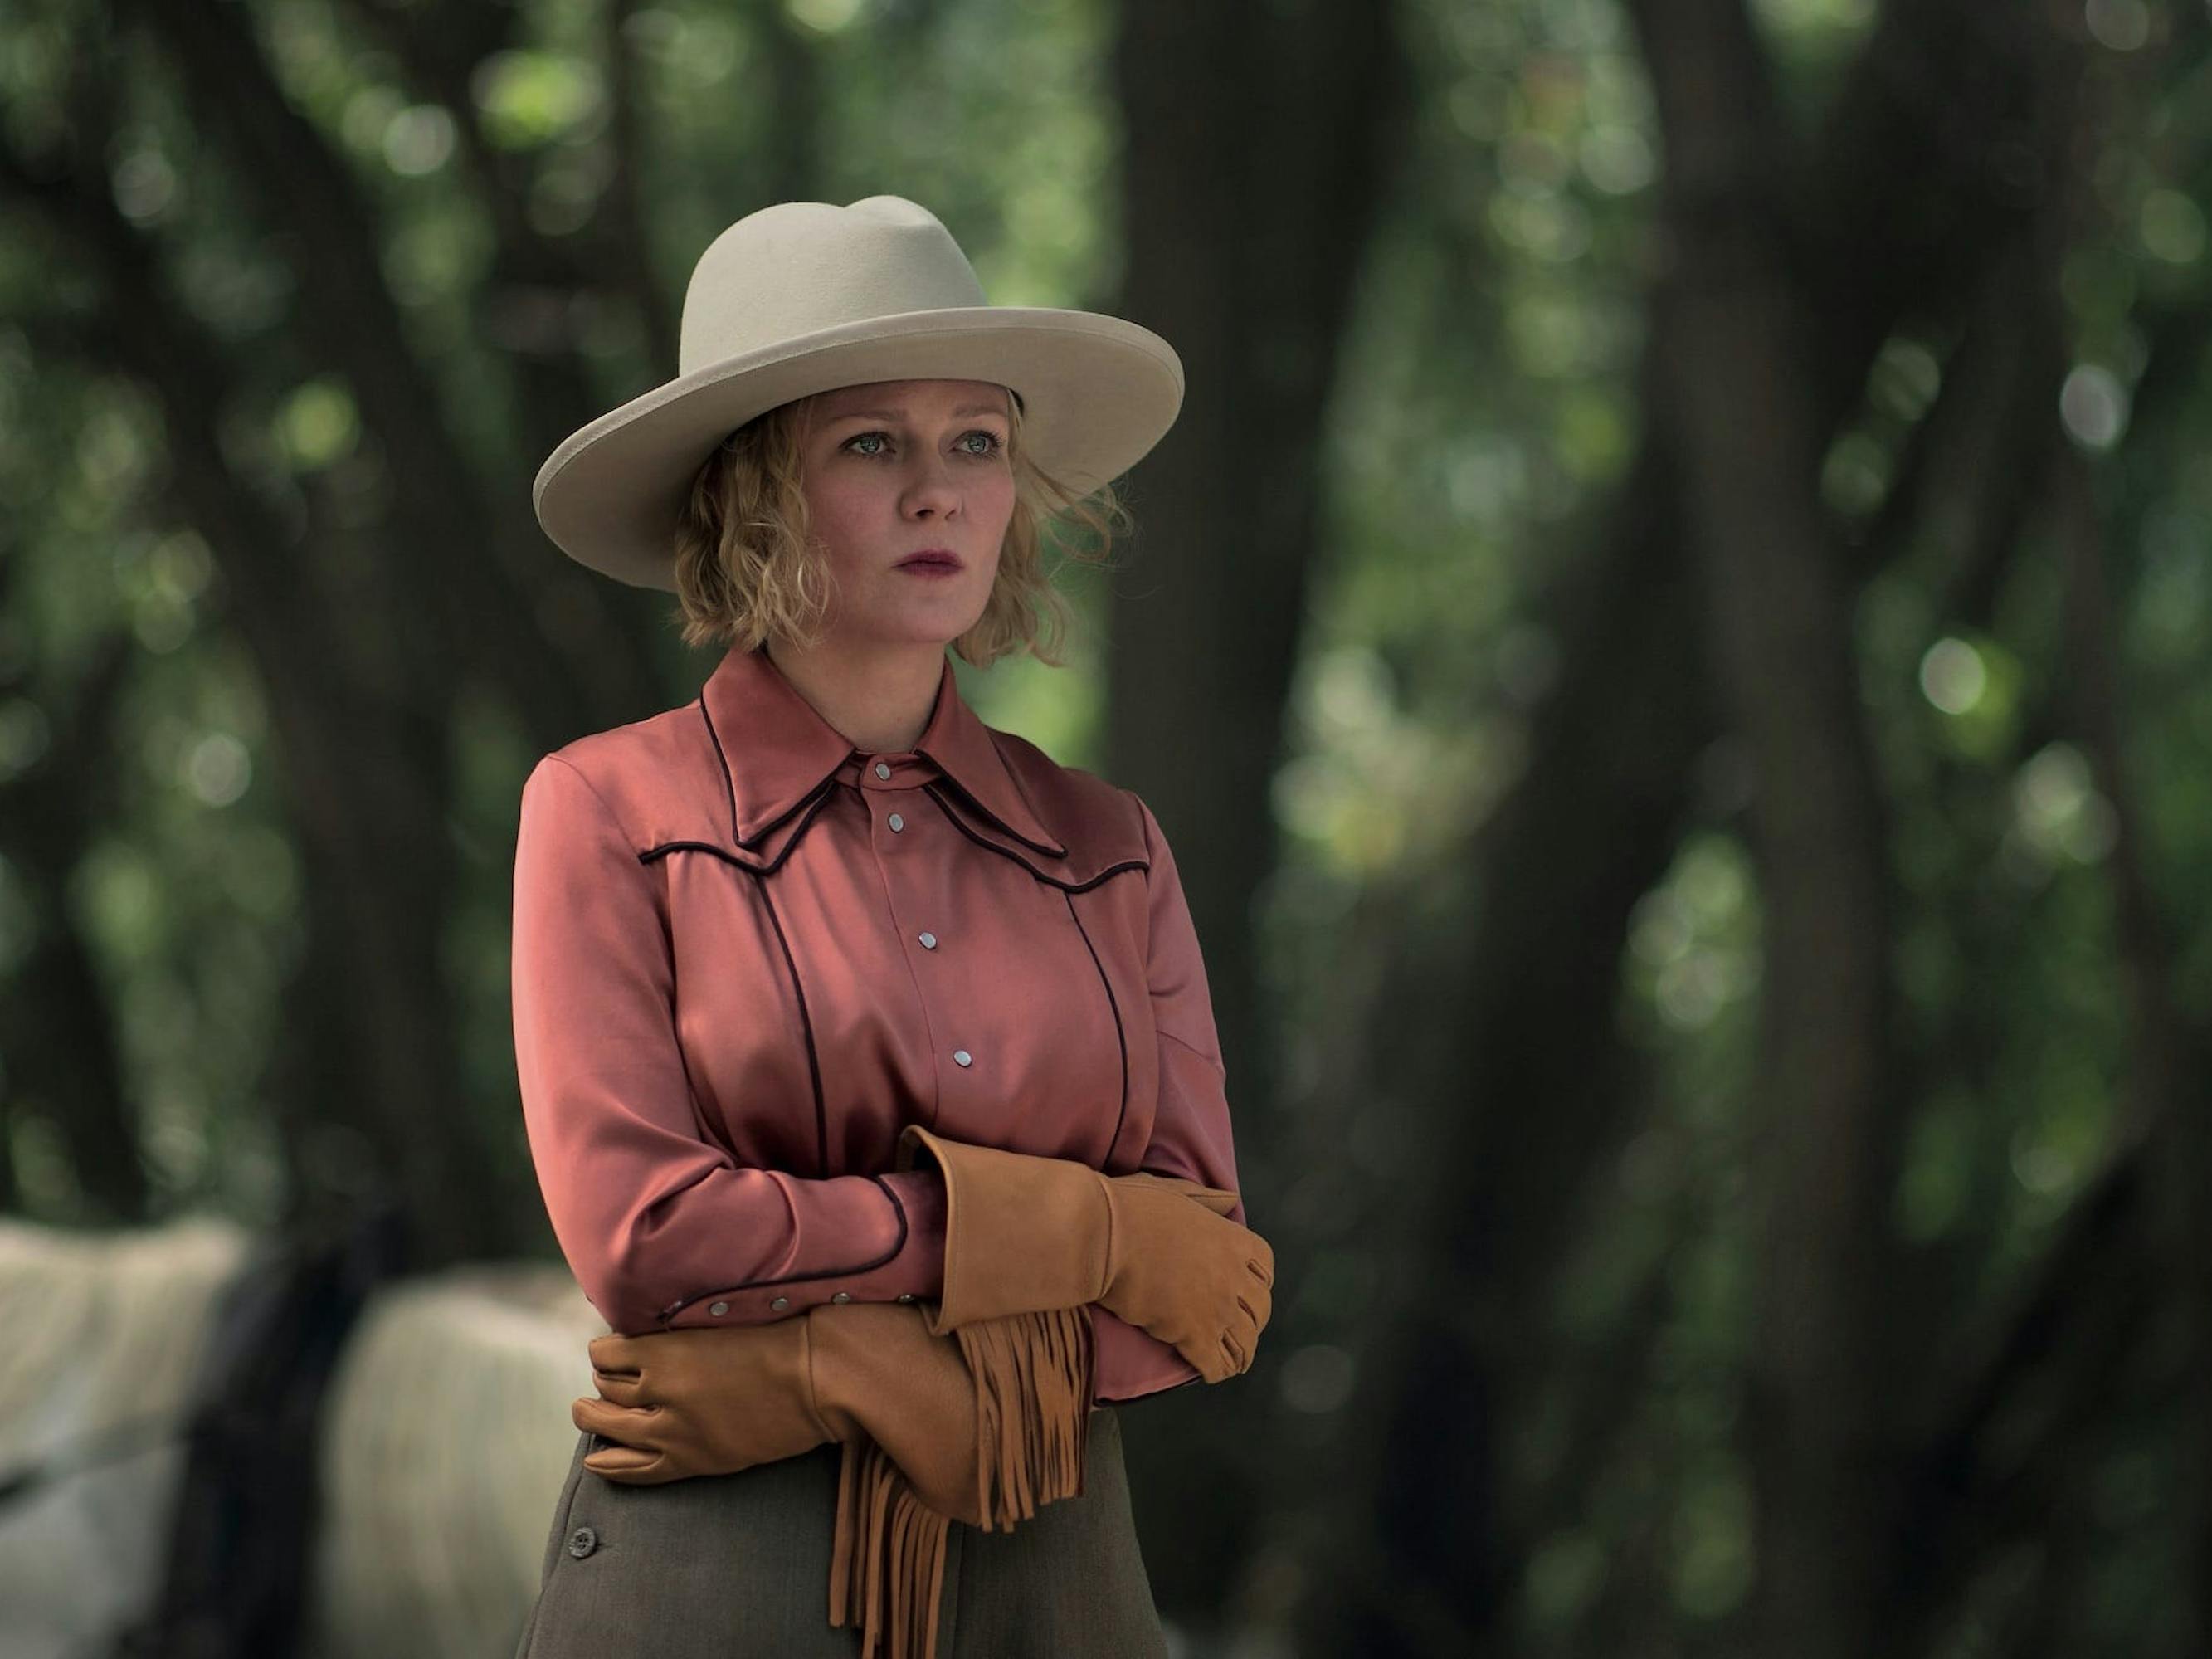 Rose (Kirsten Dunst) wears a red shirt, tan hat, and brown gloves. Behind her are dappled green trees.